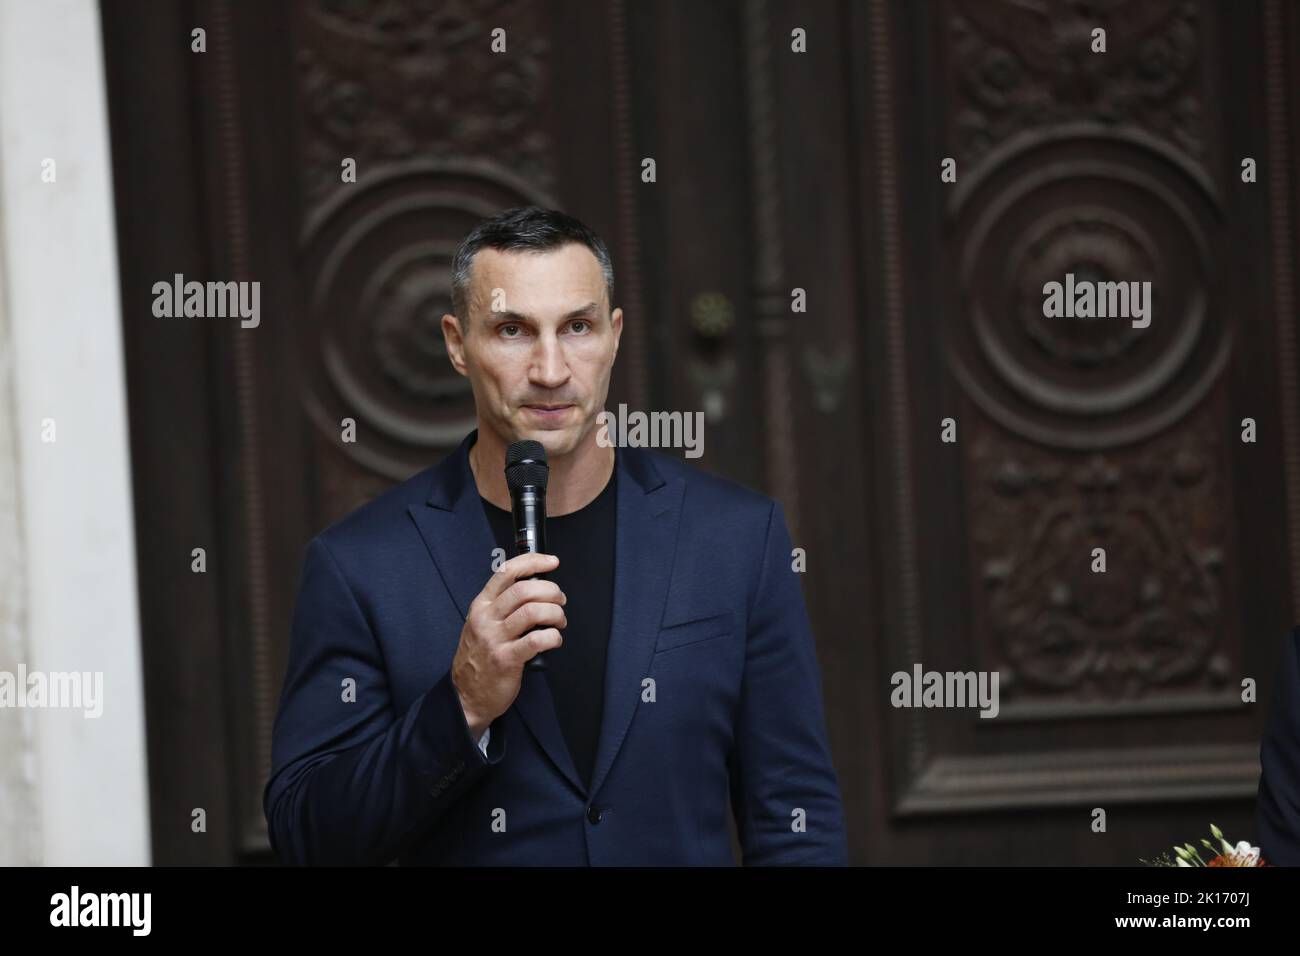 15/09/2022, Potsdam, Germany Ukrainian former boxing world heavyweight championship Wladimir Klitschko, prior to the M100 Media Award Ceremony, part of the M100 Media Conference for democracy and press freedom, in Potsdam, southwest of the German capital Berlin, on September 15, 2022. at the  Orangerie Sanssouci in Sanssouci Park on September 15, 2022 in Potsdam, Germany.With the M100 Media Award, which sees itself as the 'Prize of the European Press', Year awarded the Ukrainian people. Wladimir Klitschko takes the award in his place. Stock Photo